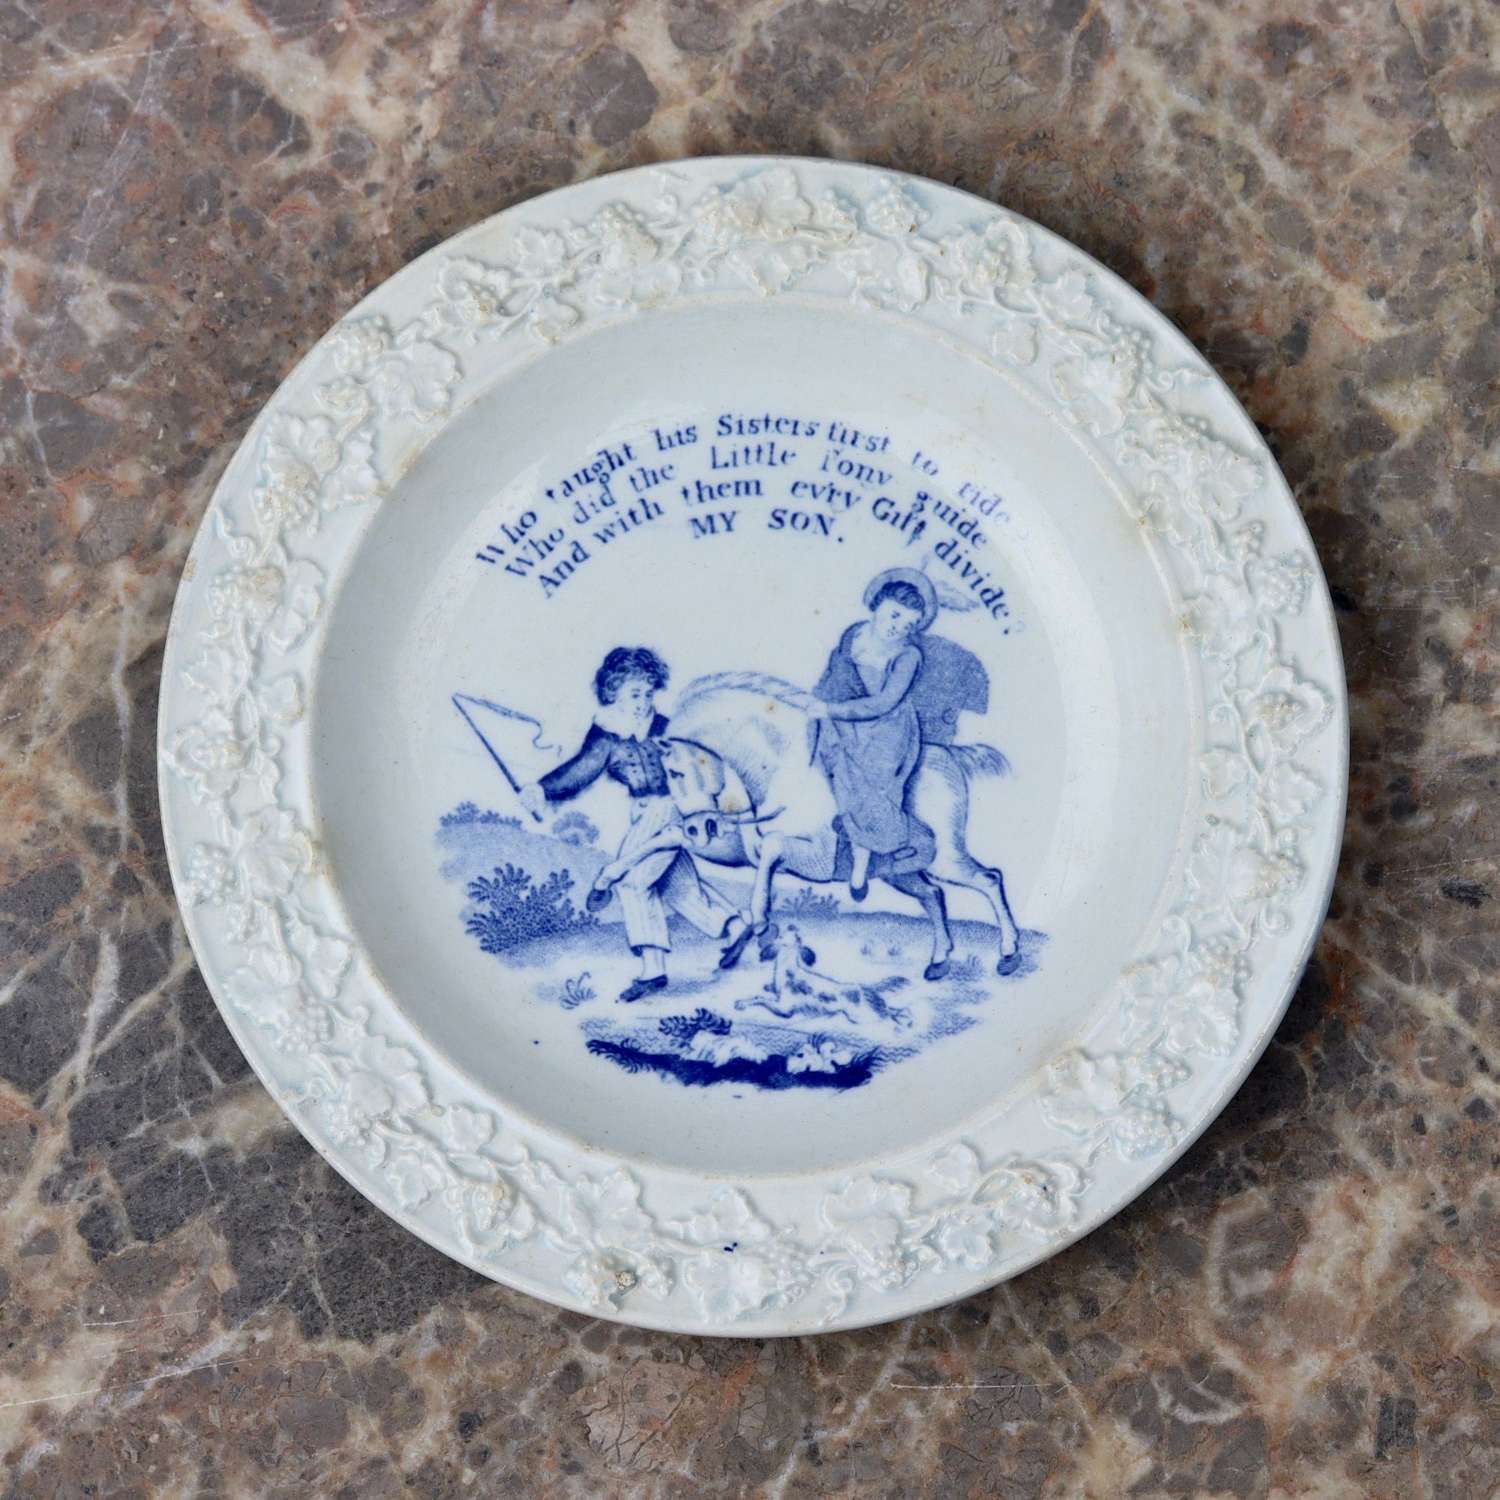 Child's Plate 